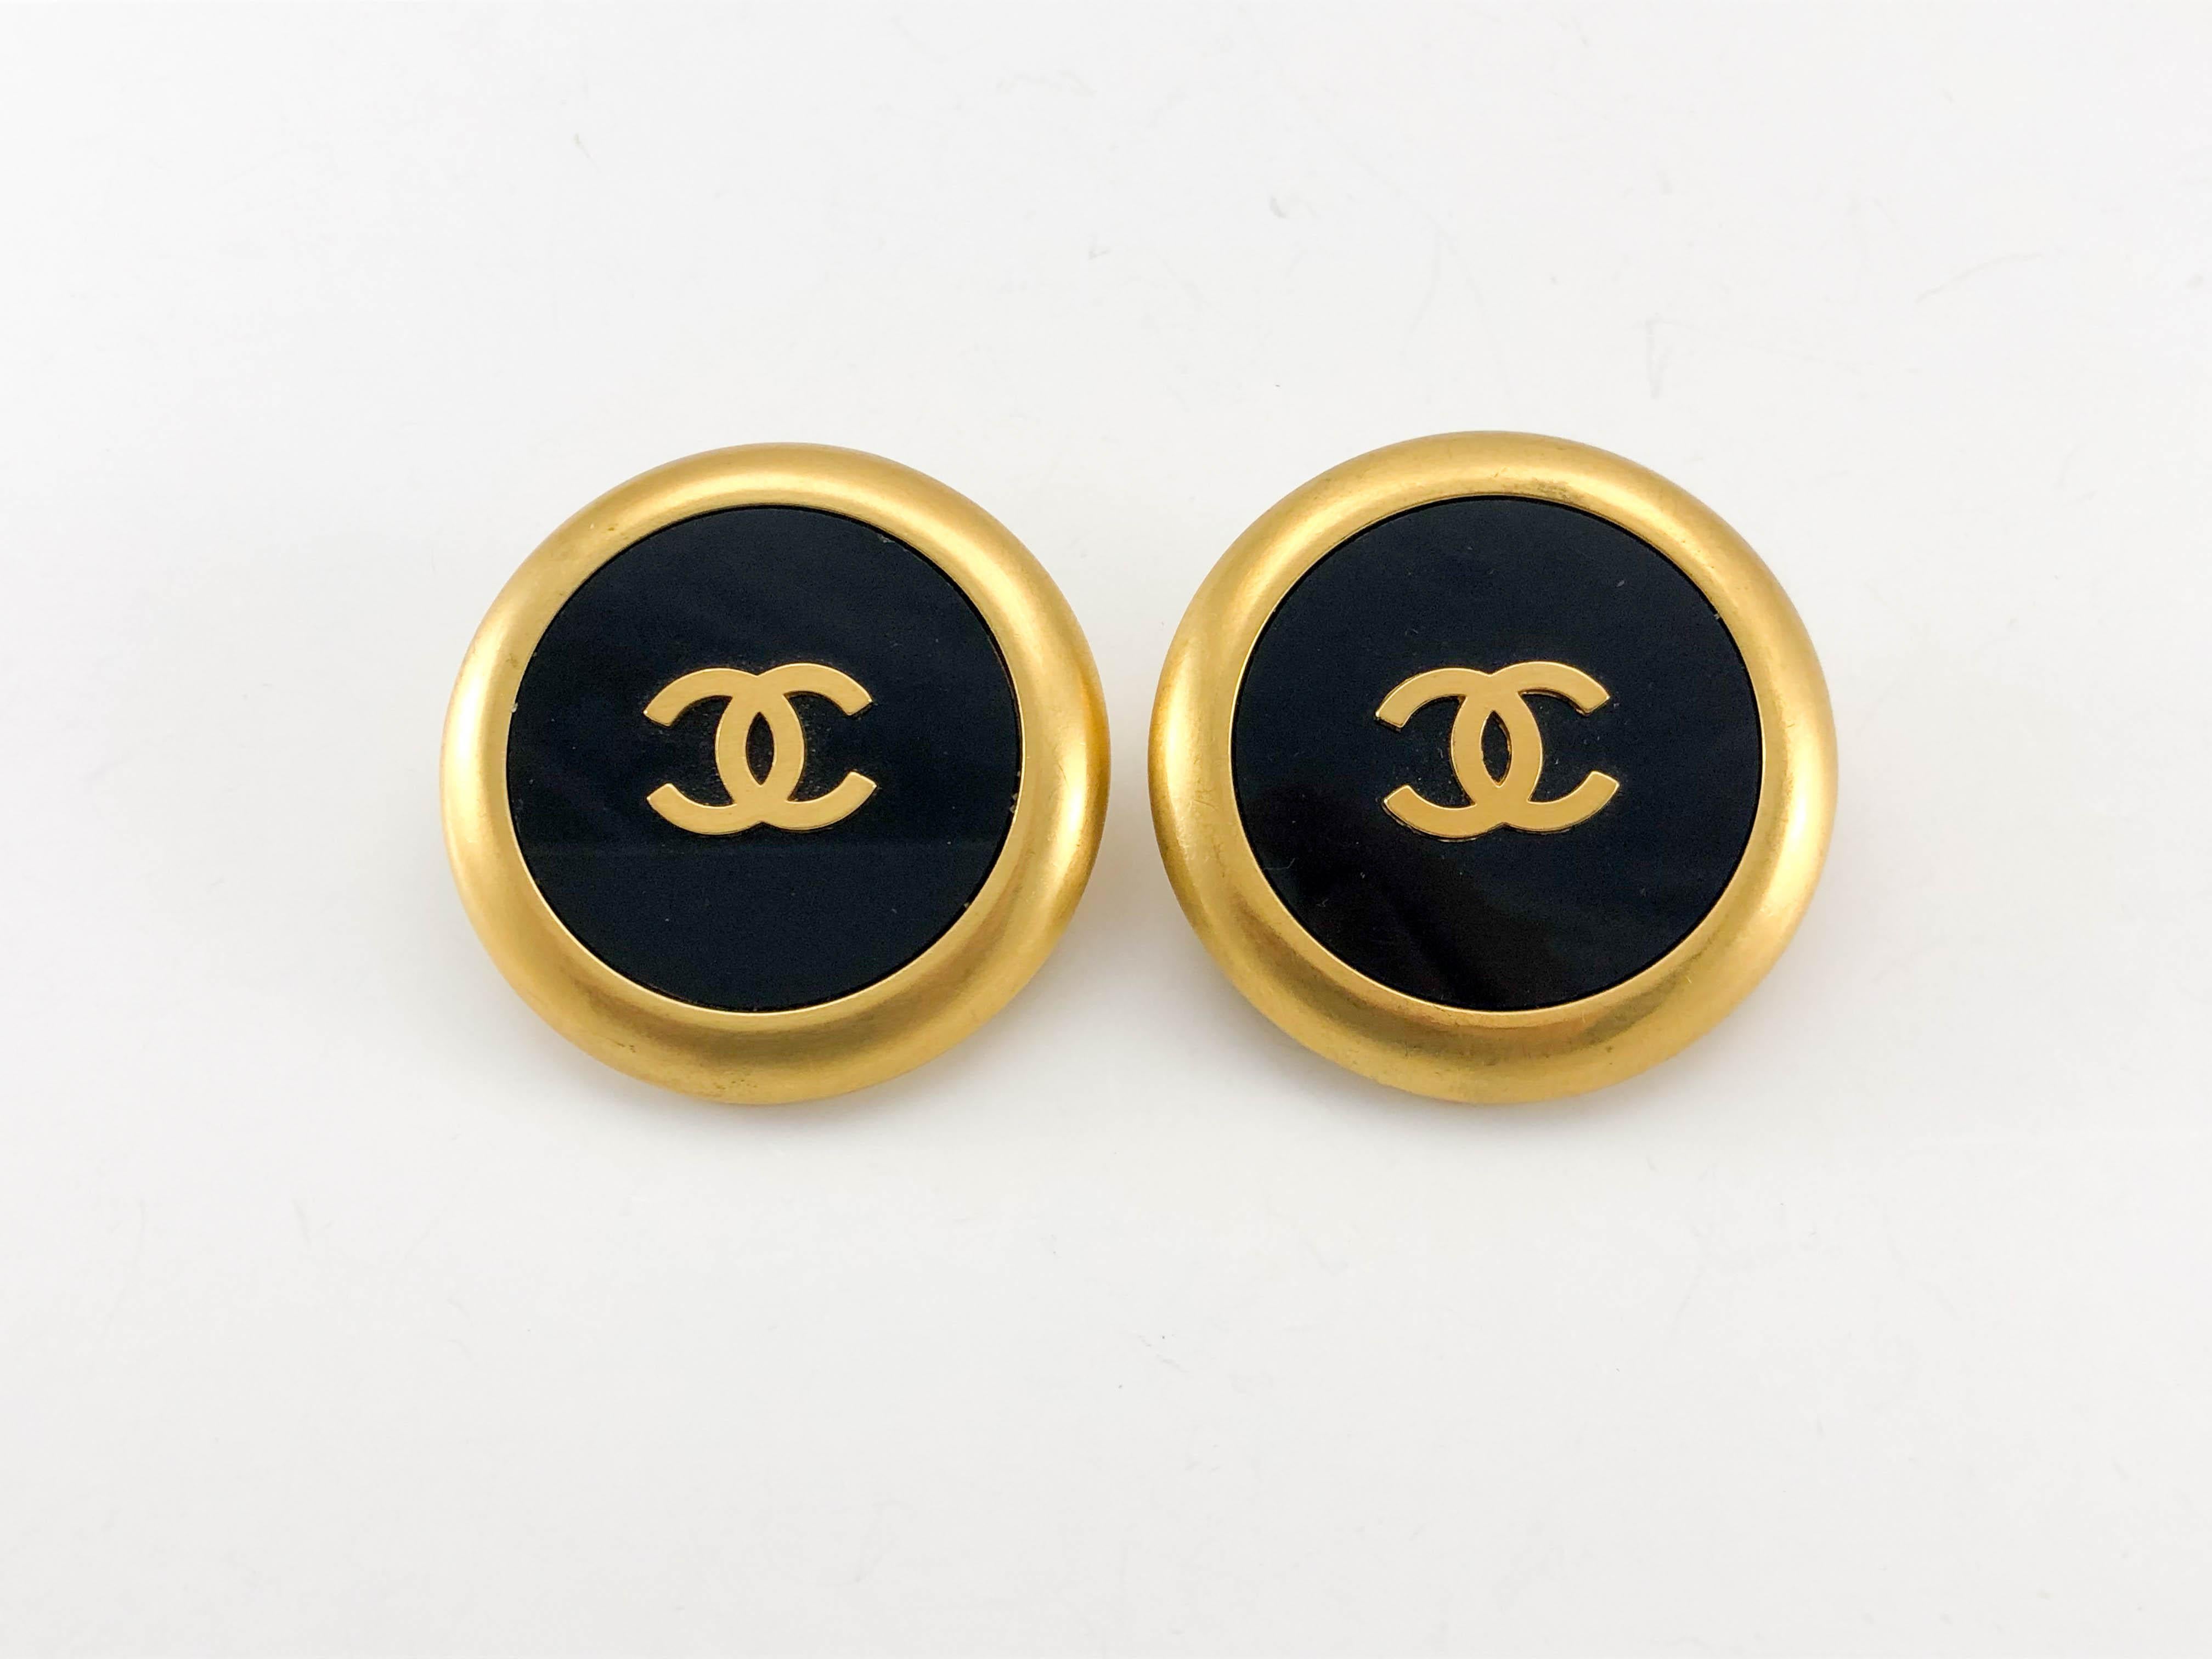 1992 Chanel Large Black And Golden Round Logo Earrings For Sale 2